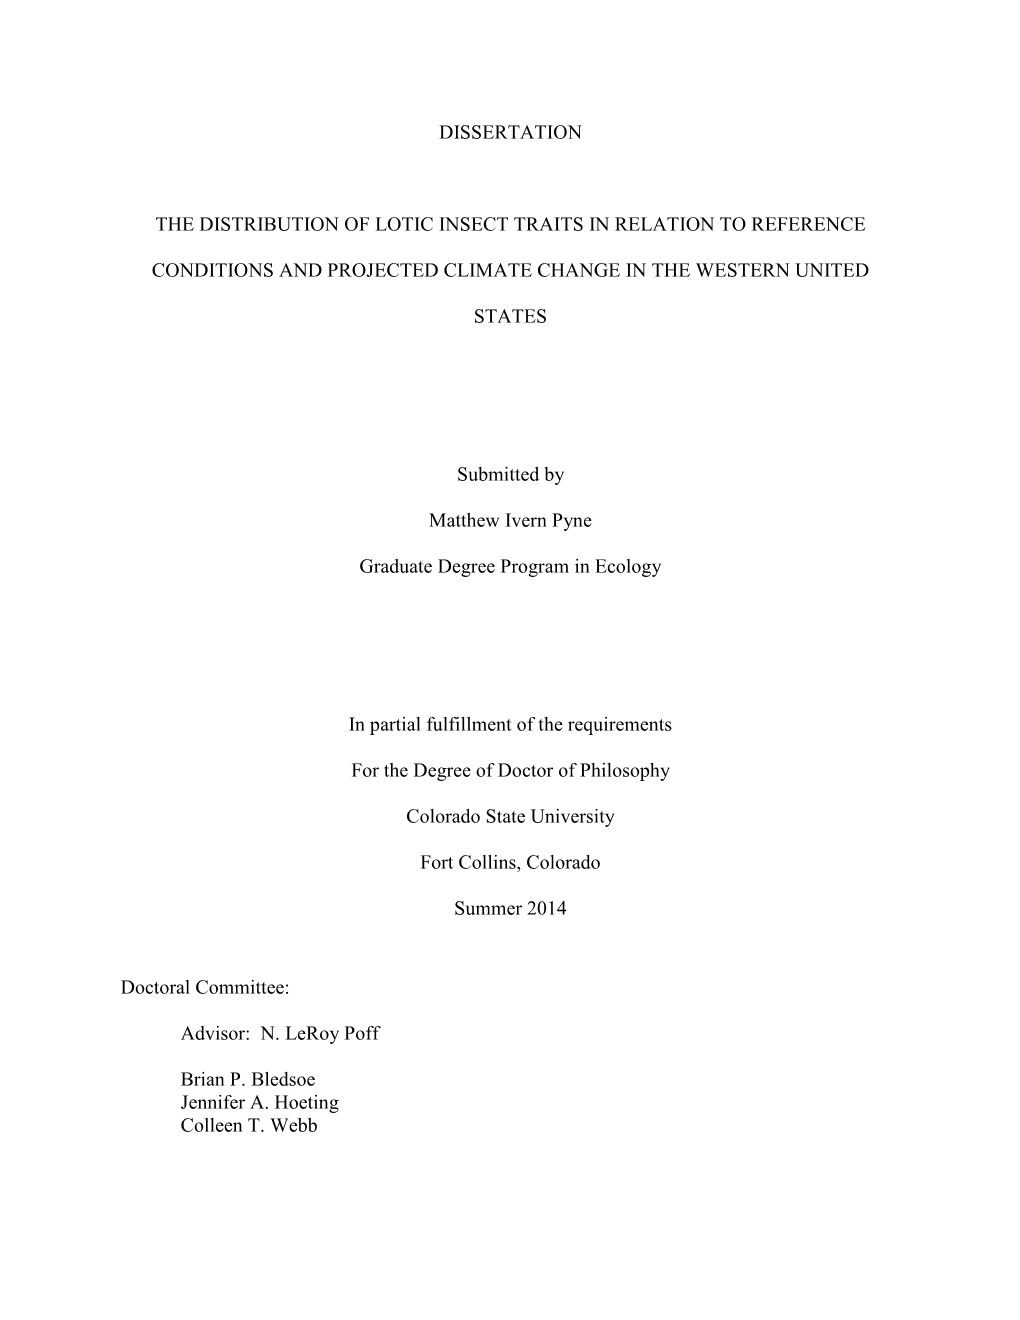 Dissertation the Distribution of Lotic Insect Traits in Relation to Reference Conditions and Projected Climate Change in the We